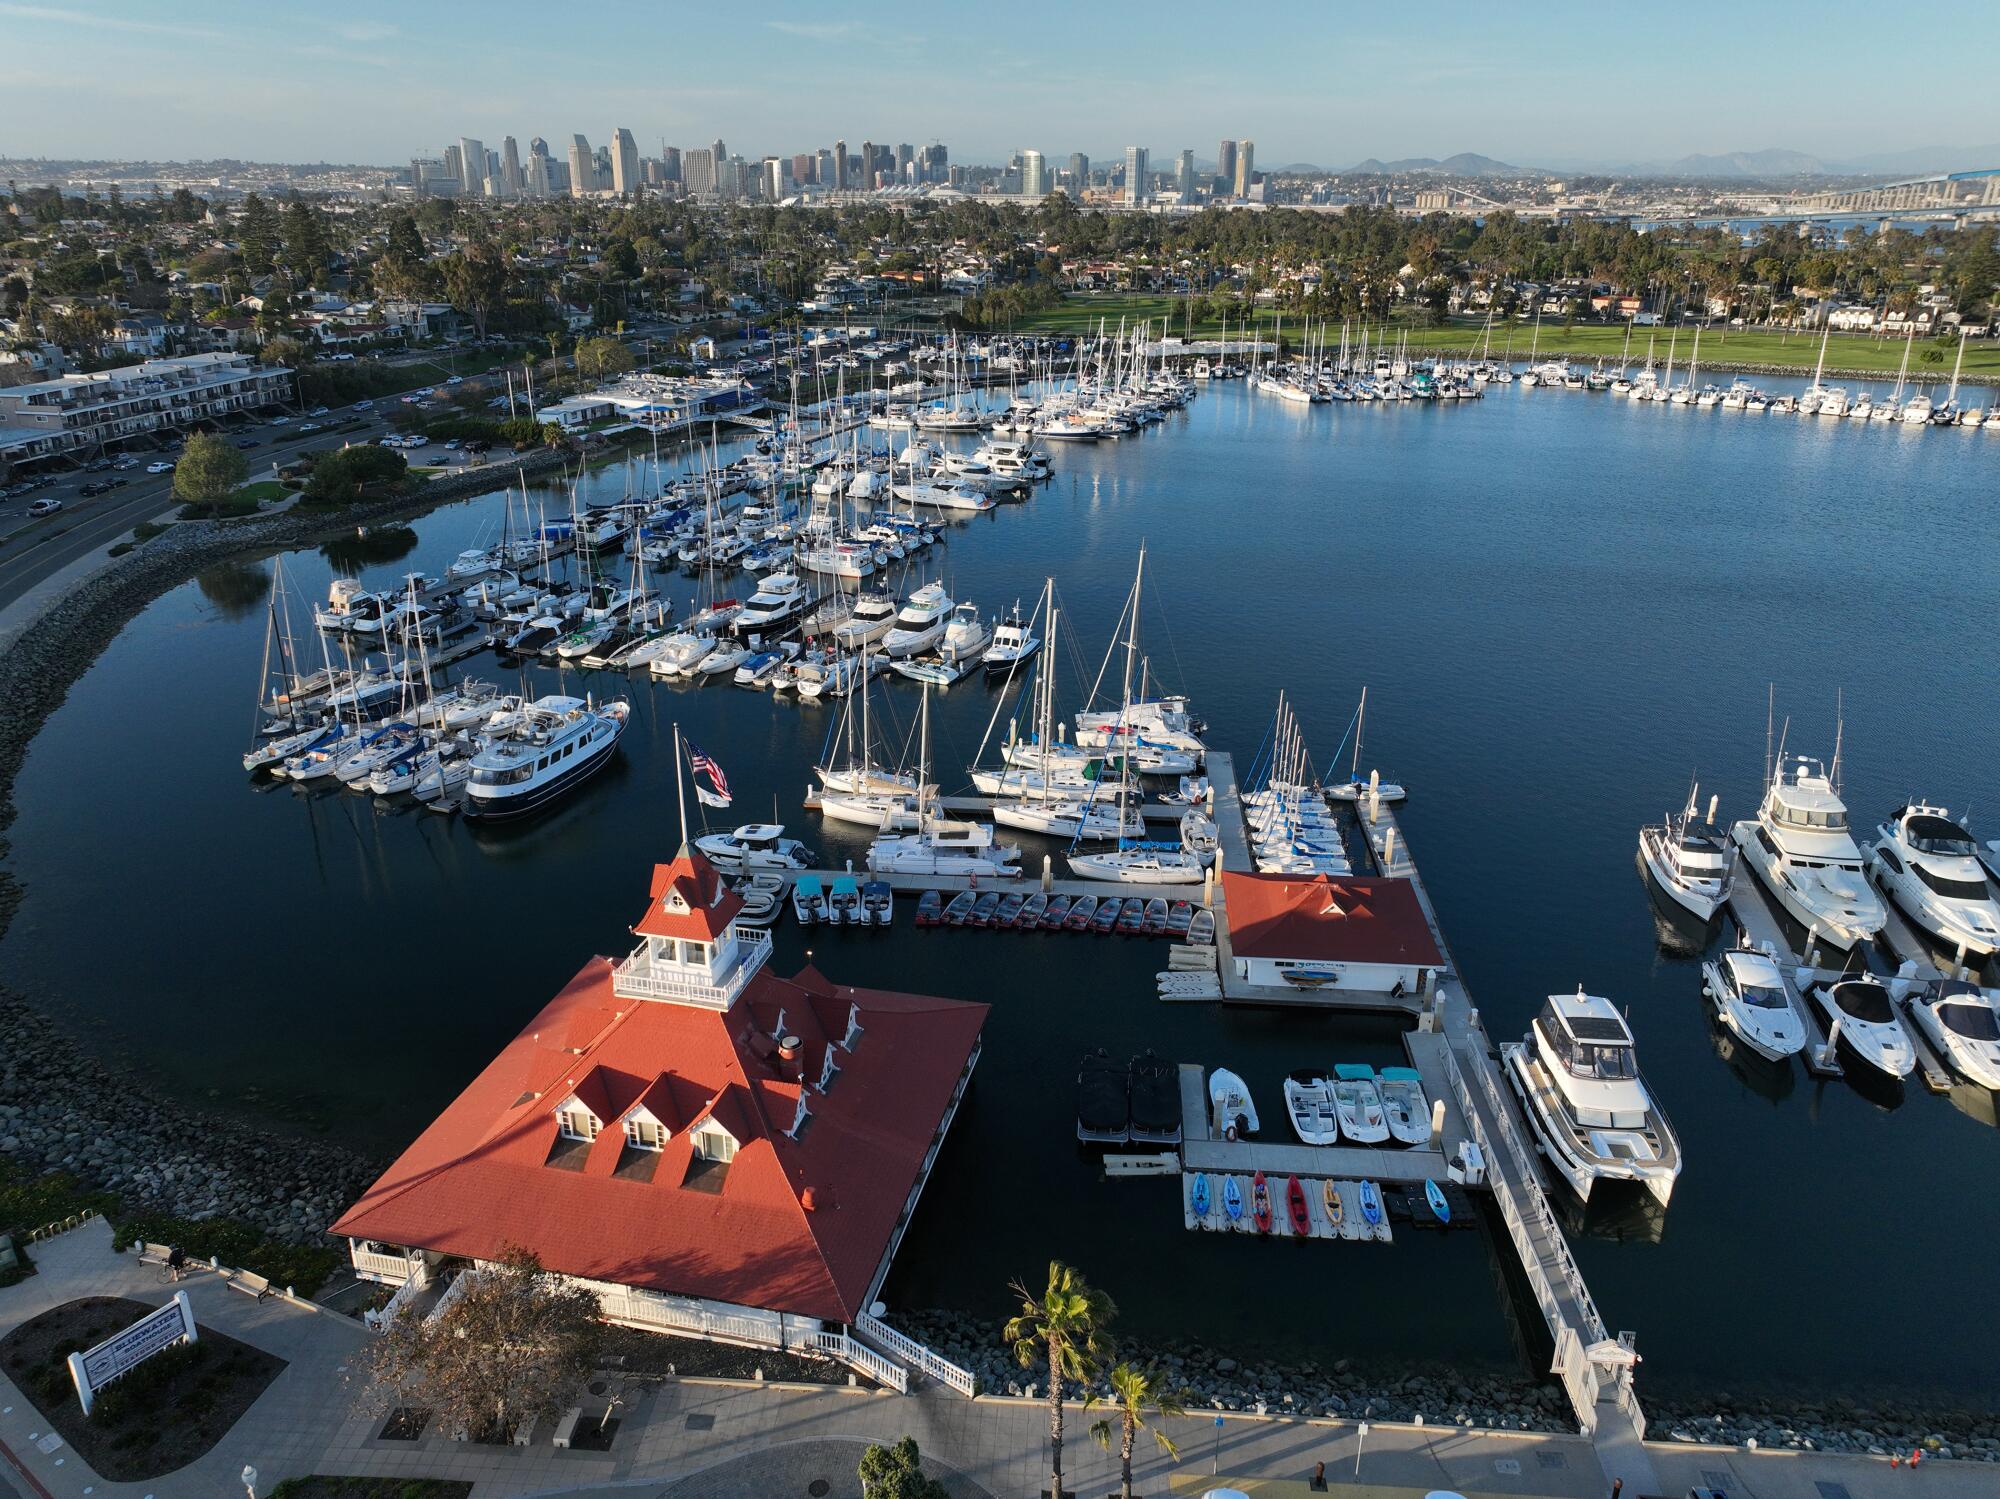 View of the Bluewater Boathouse Seafood Grill on the Glorietta Bay Marina in Coronado.